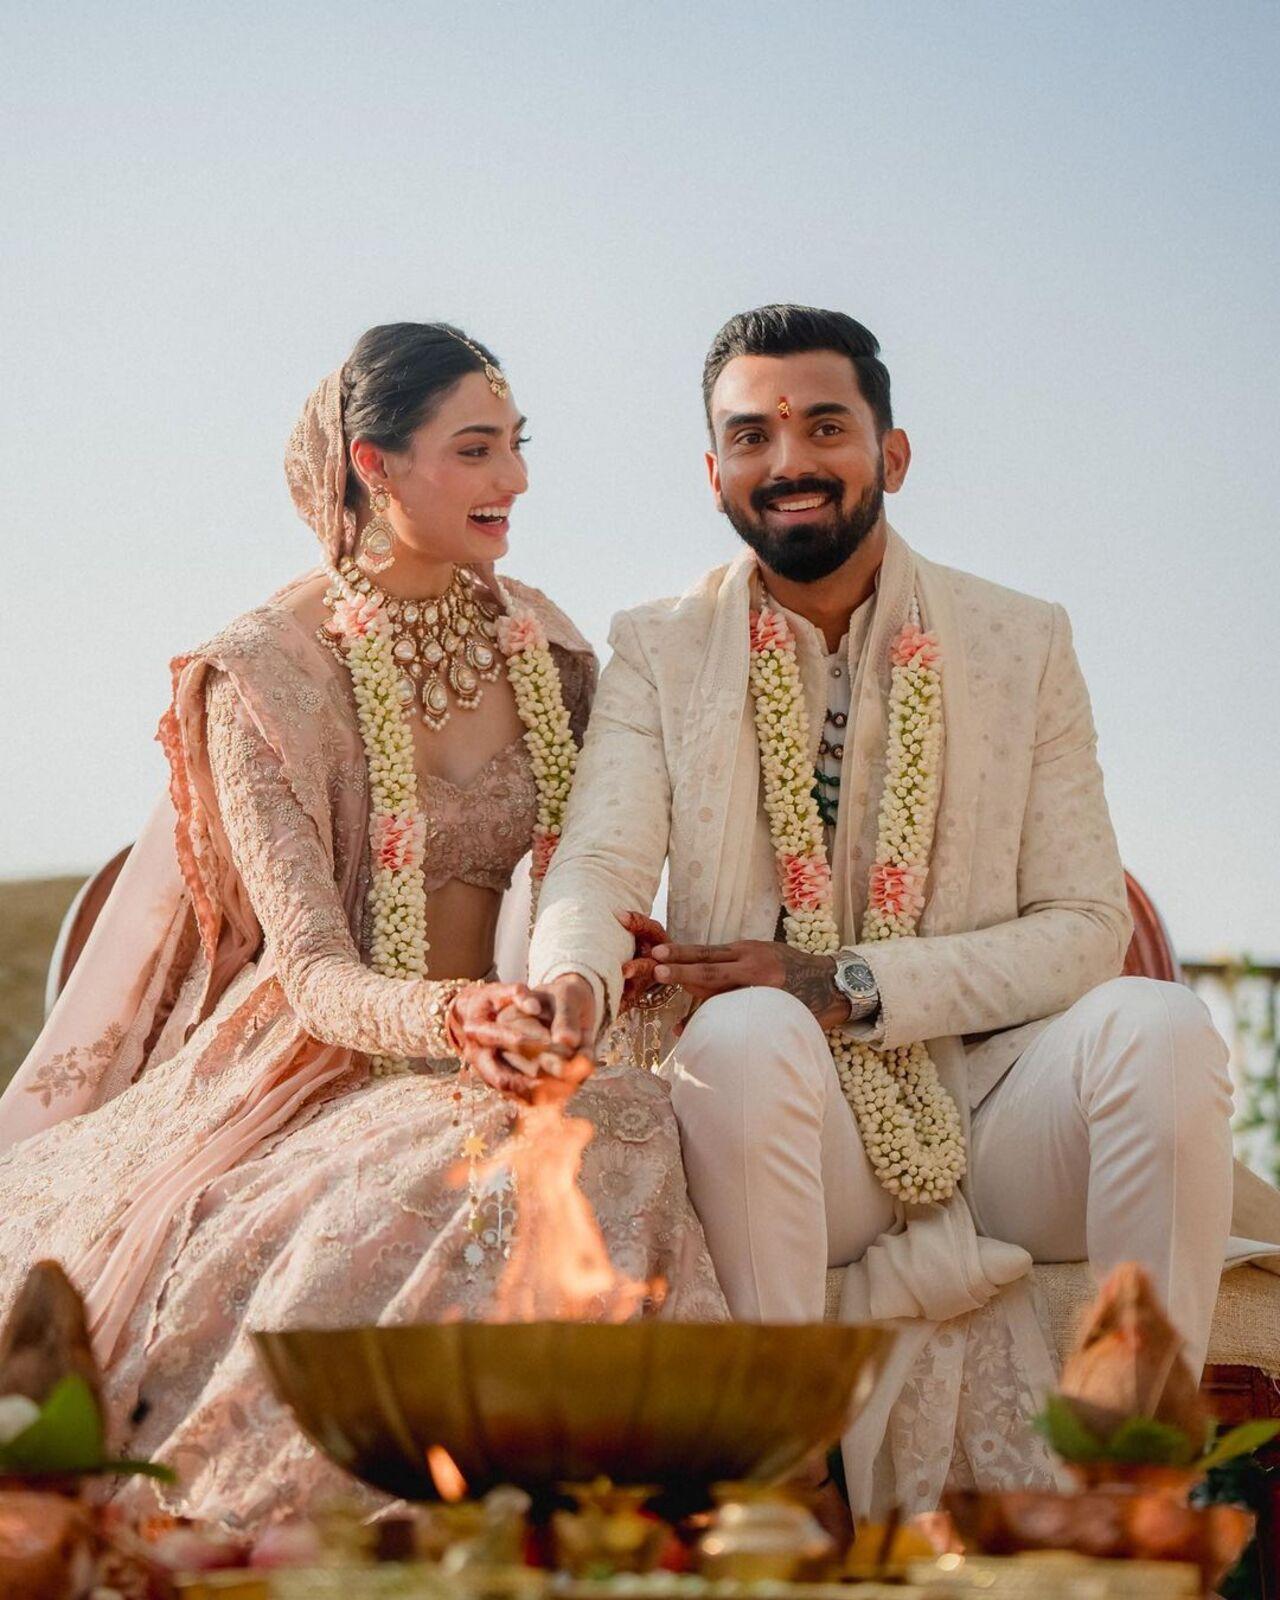 Athiya Shetty wore a subtle pink Anamika Khanna chikankari lehenga for her wedding with KL Rahul in January this year. It was handwoven and made in silk with zardozi and jaali work